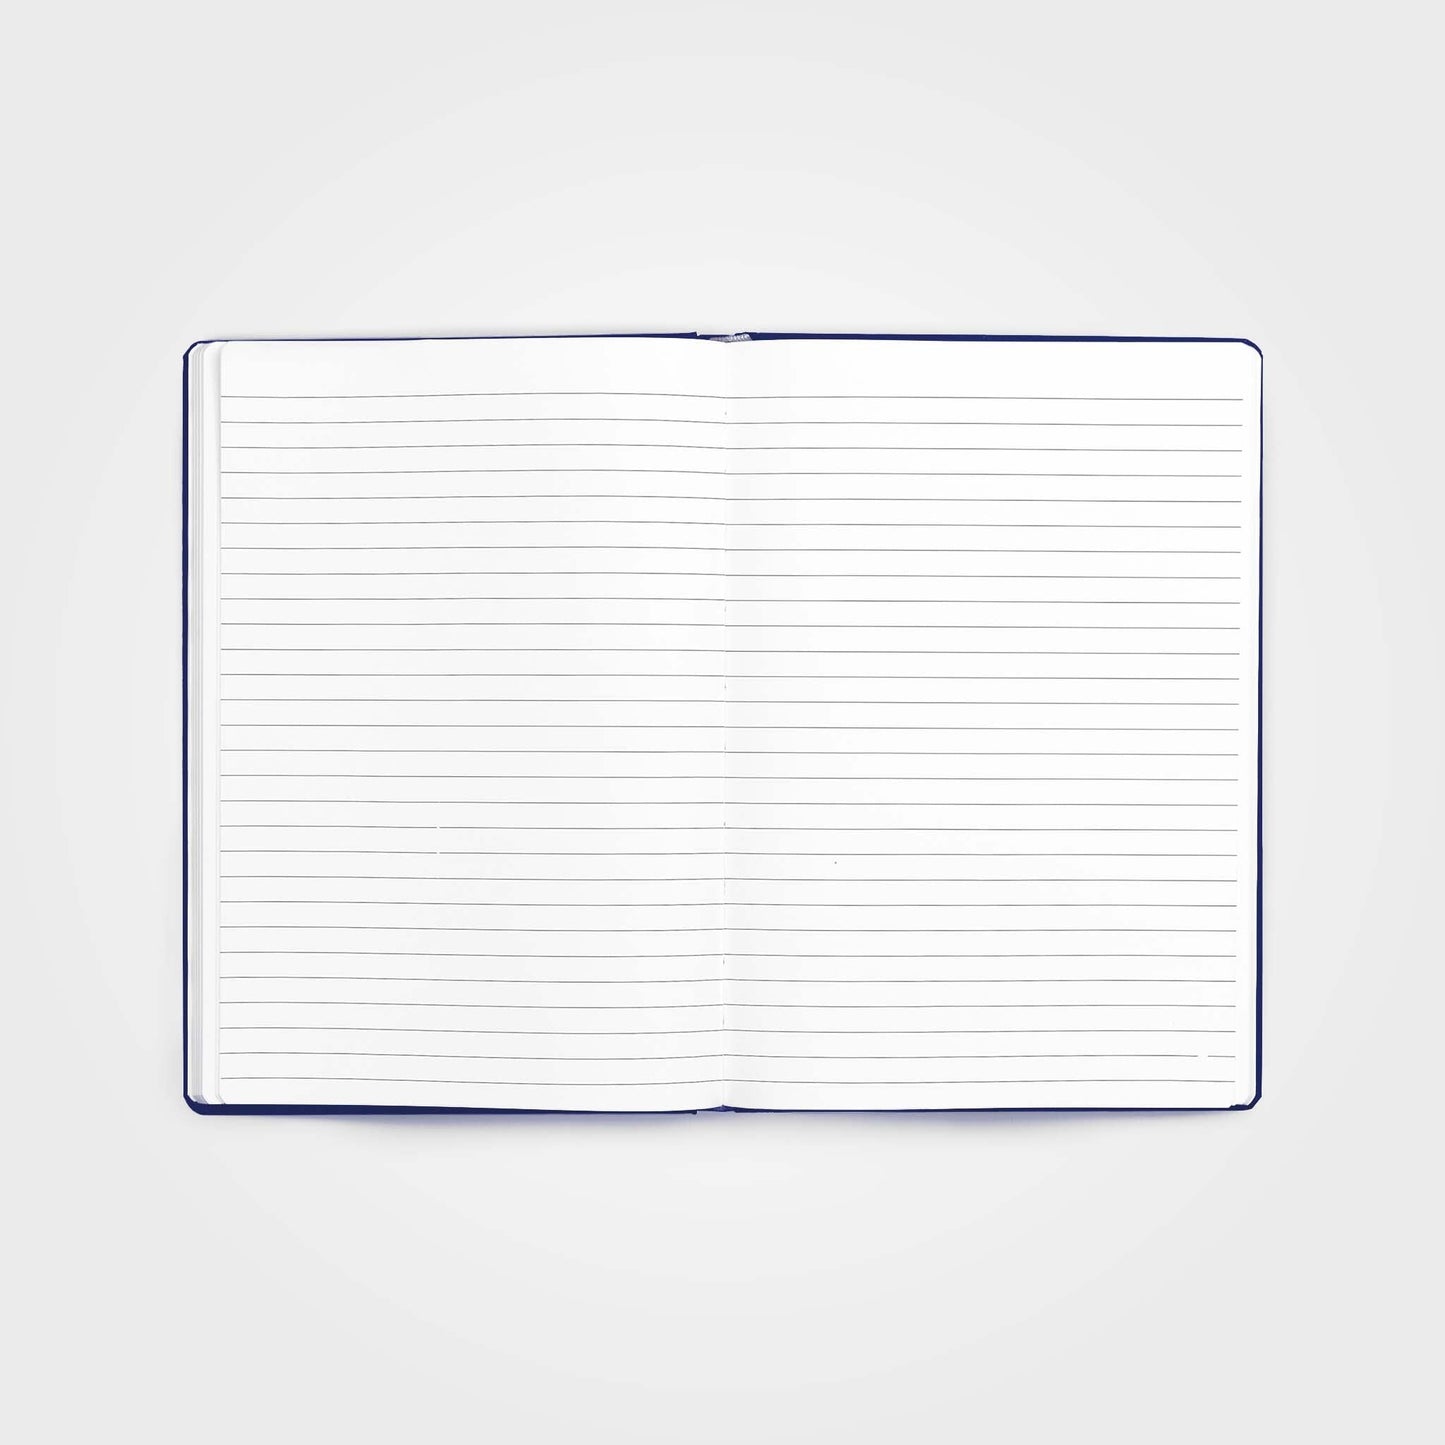 Stone paper notebook - A5 Hardcover, Navy Blue